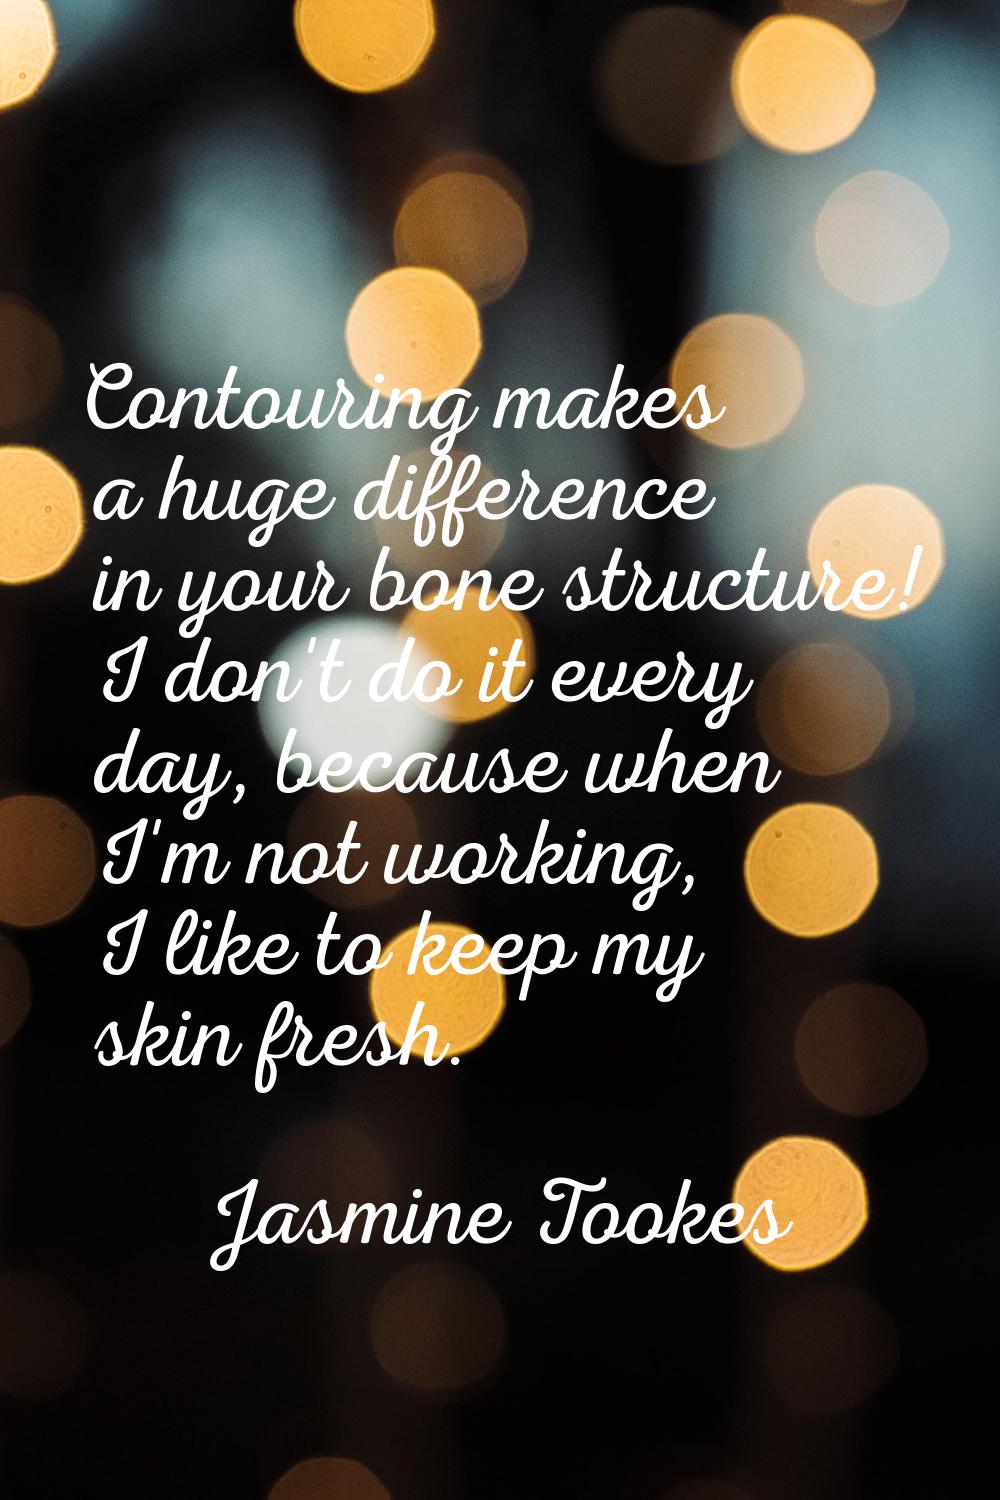 Contouring makes a huge difference in your bone structure! I don't do it every day, because when I'